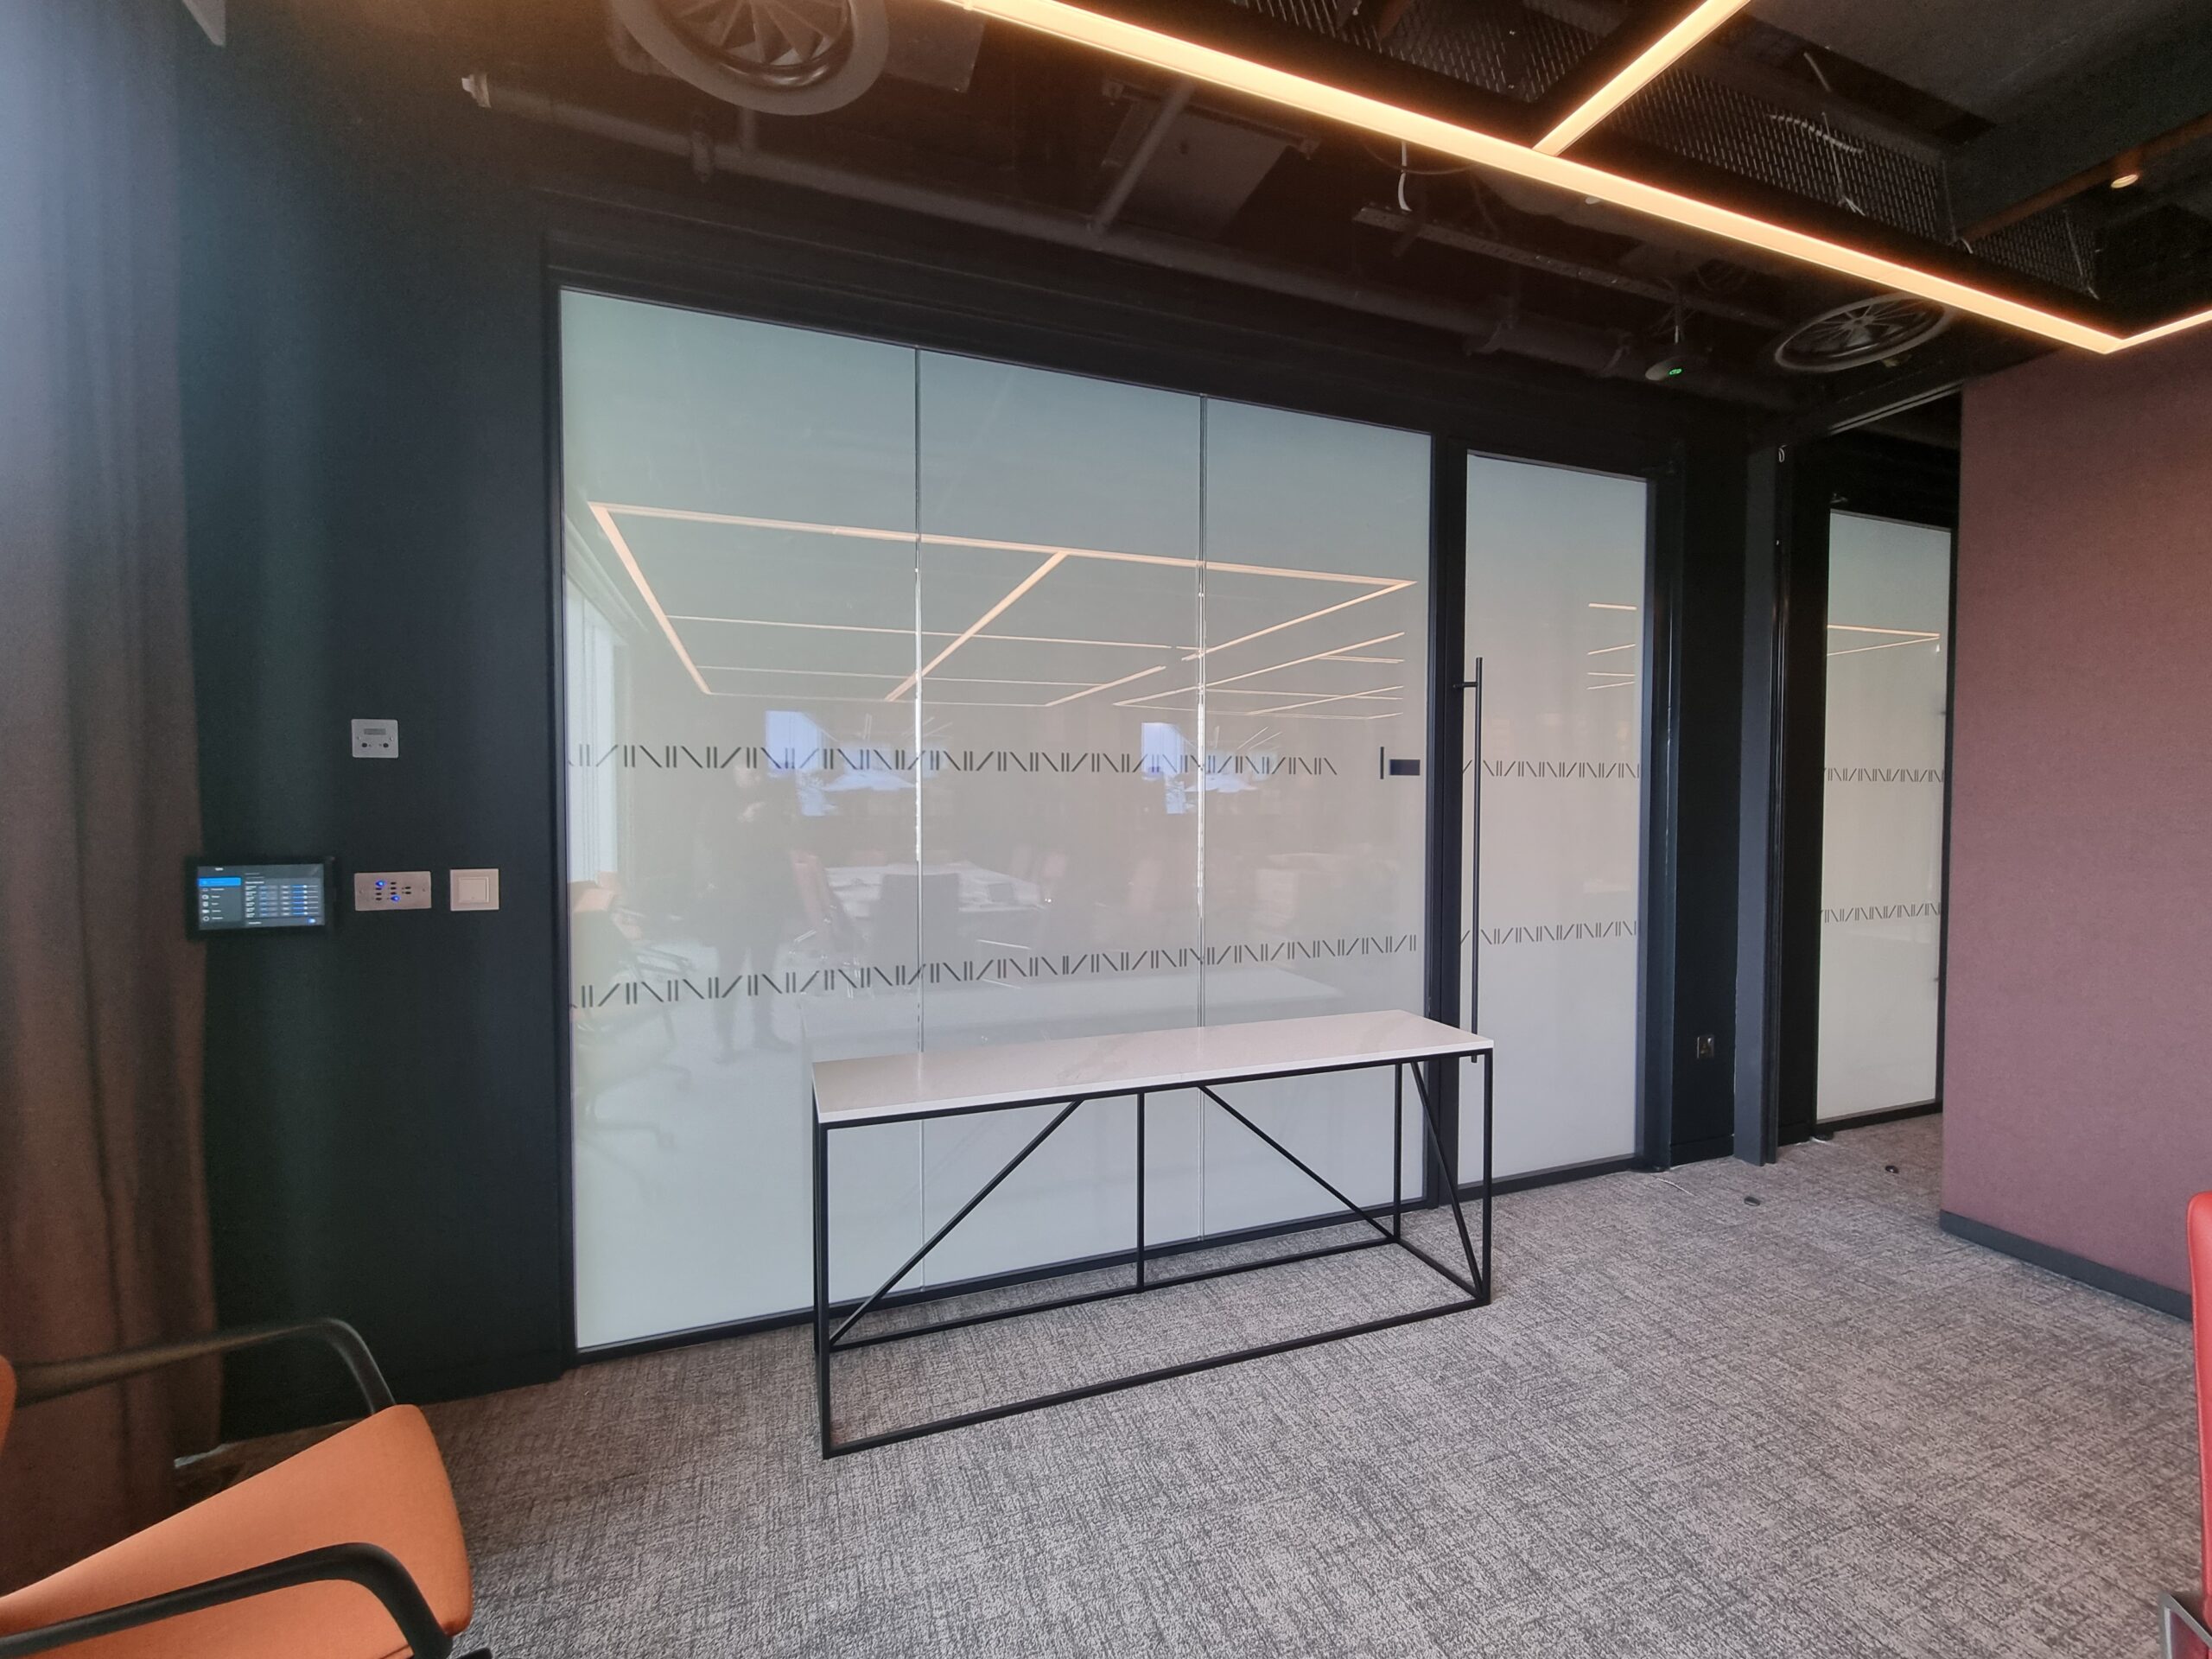 Switchable privacy glass transforms a London office into a stylish open-plan space to maximise natural light.